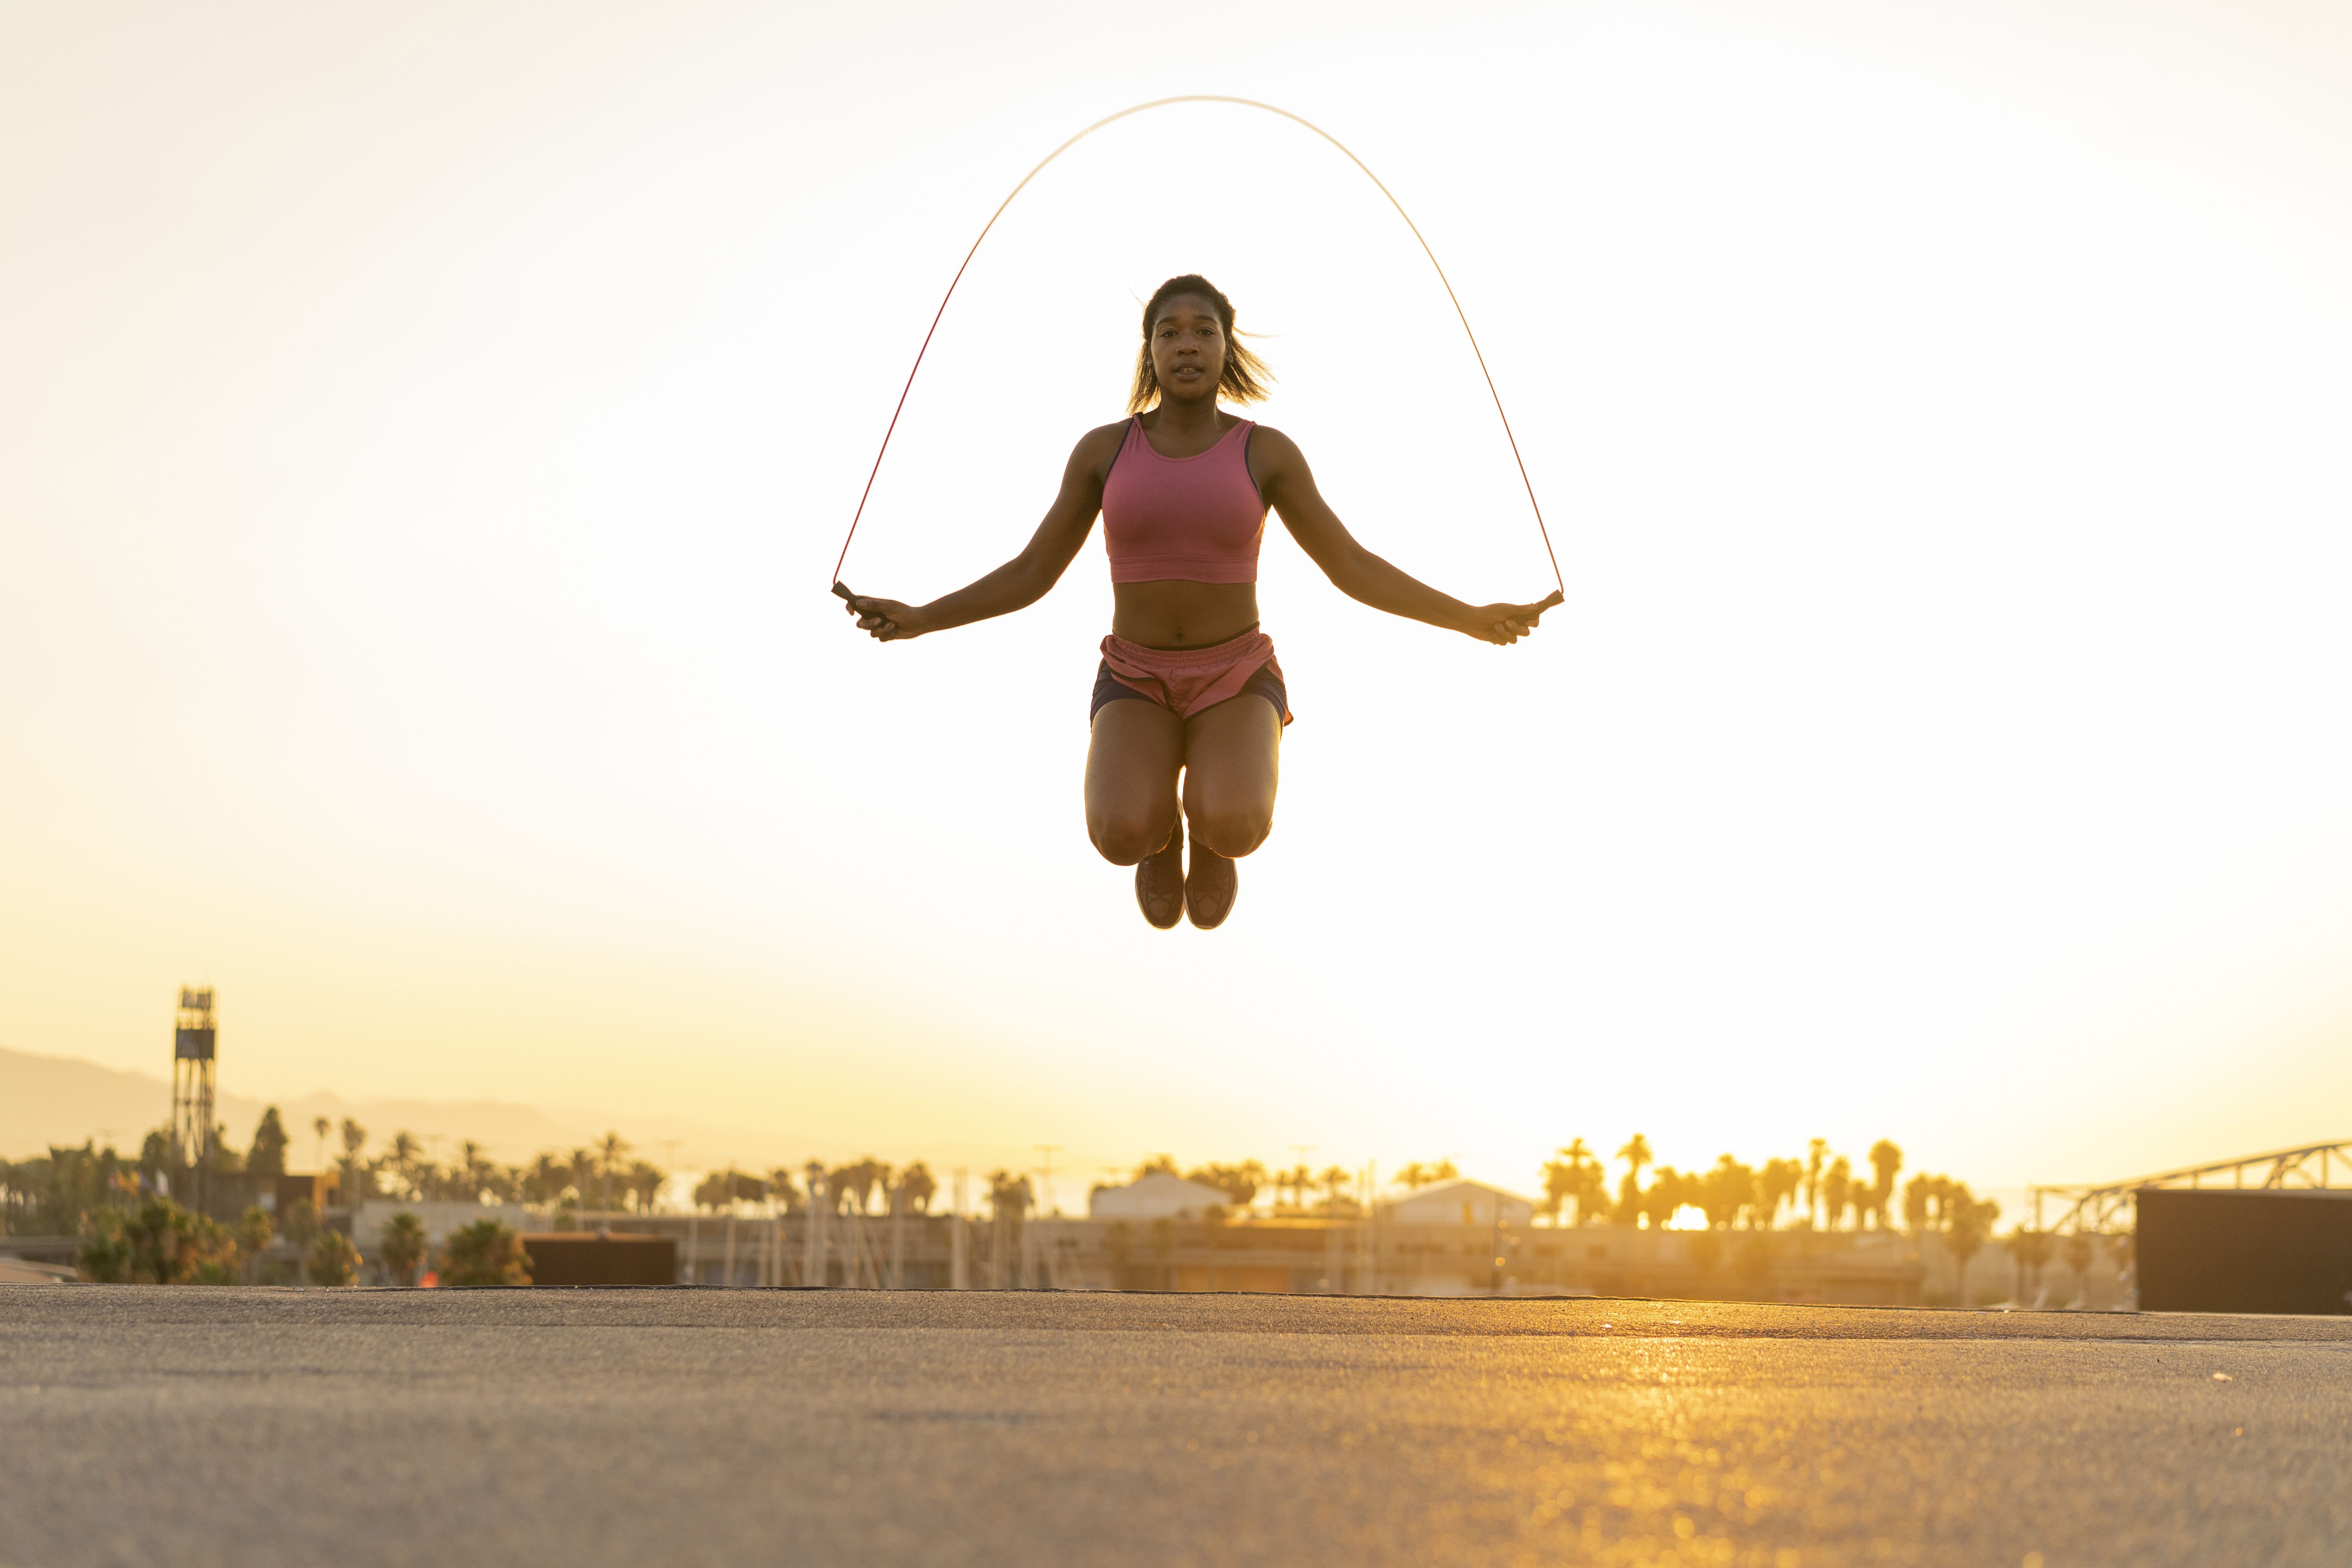 The Best Jump Rope Workout For Beginners, From A Trainer